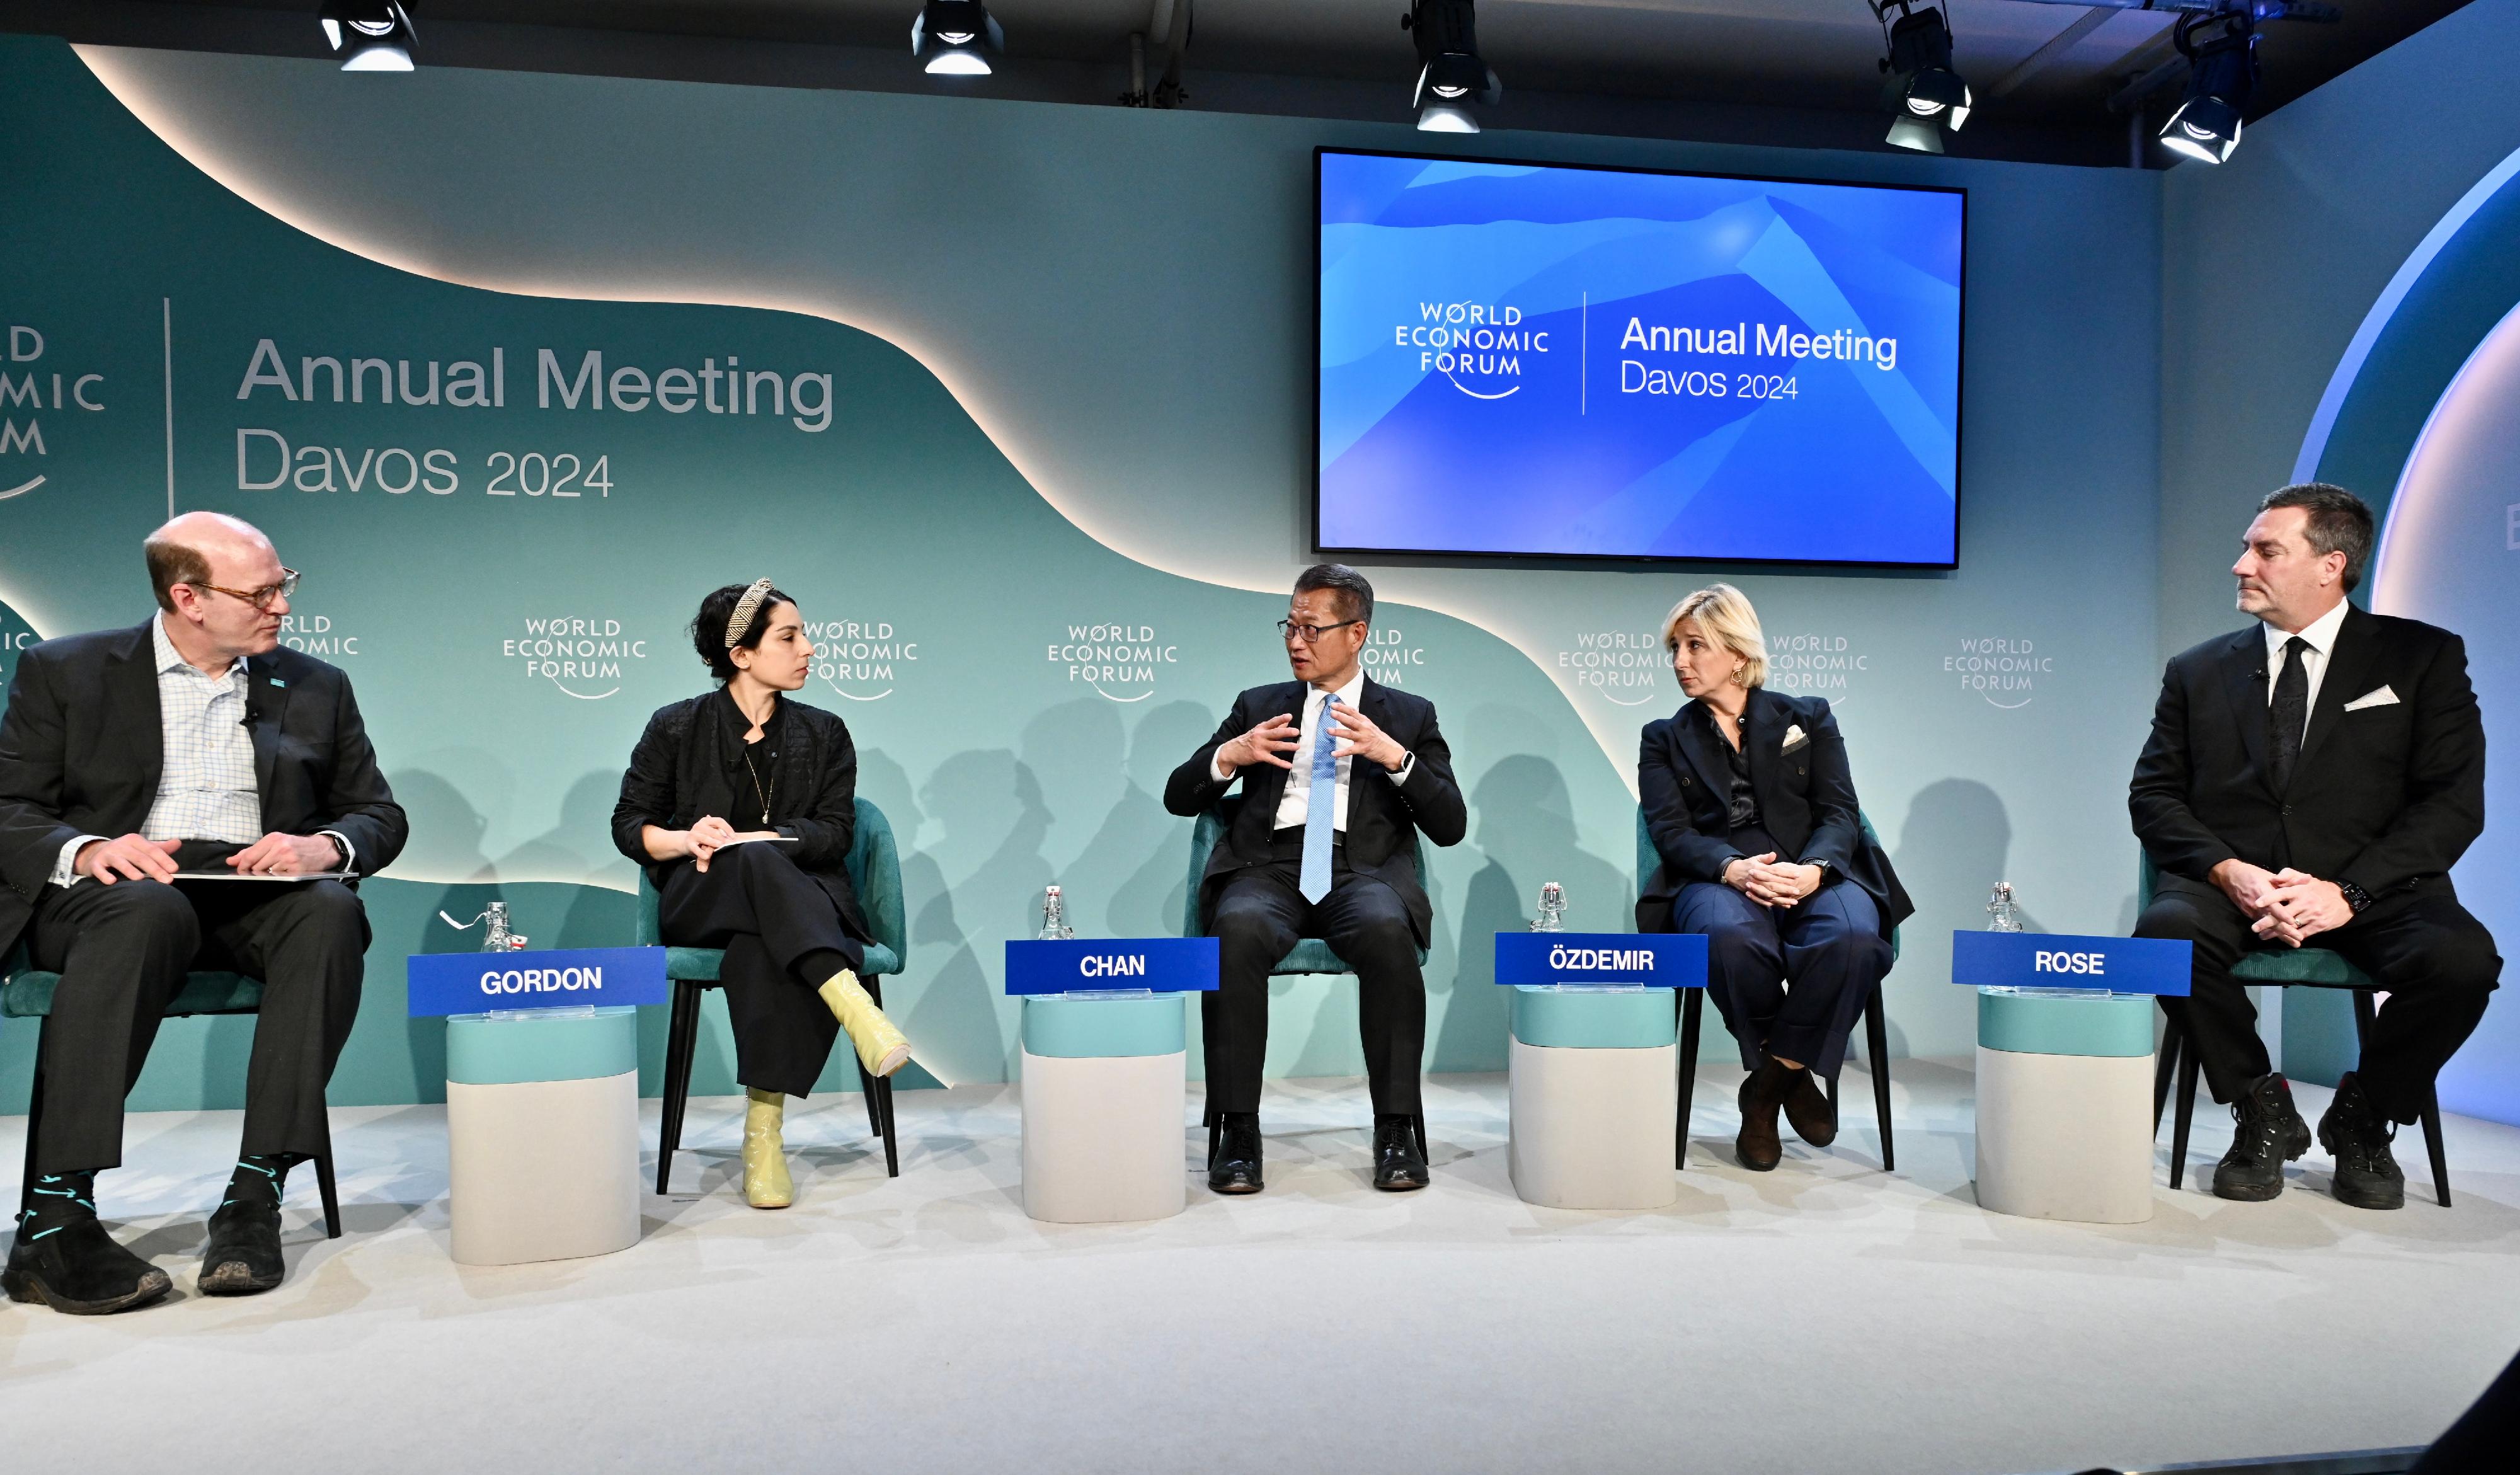 FS continues his visit to Davos